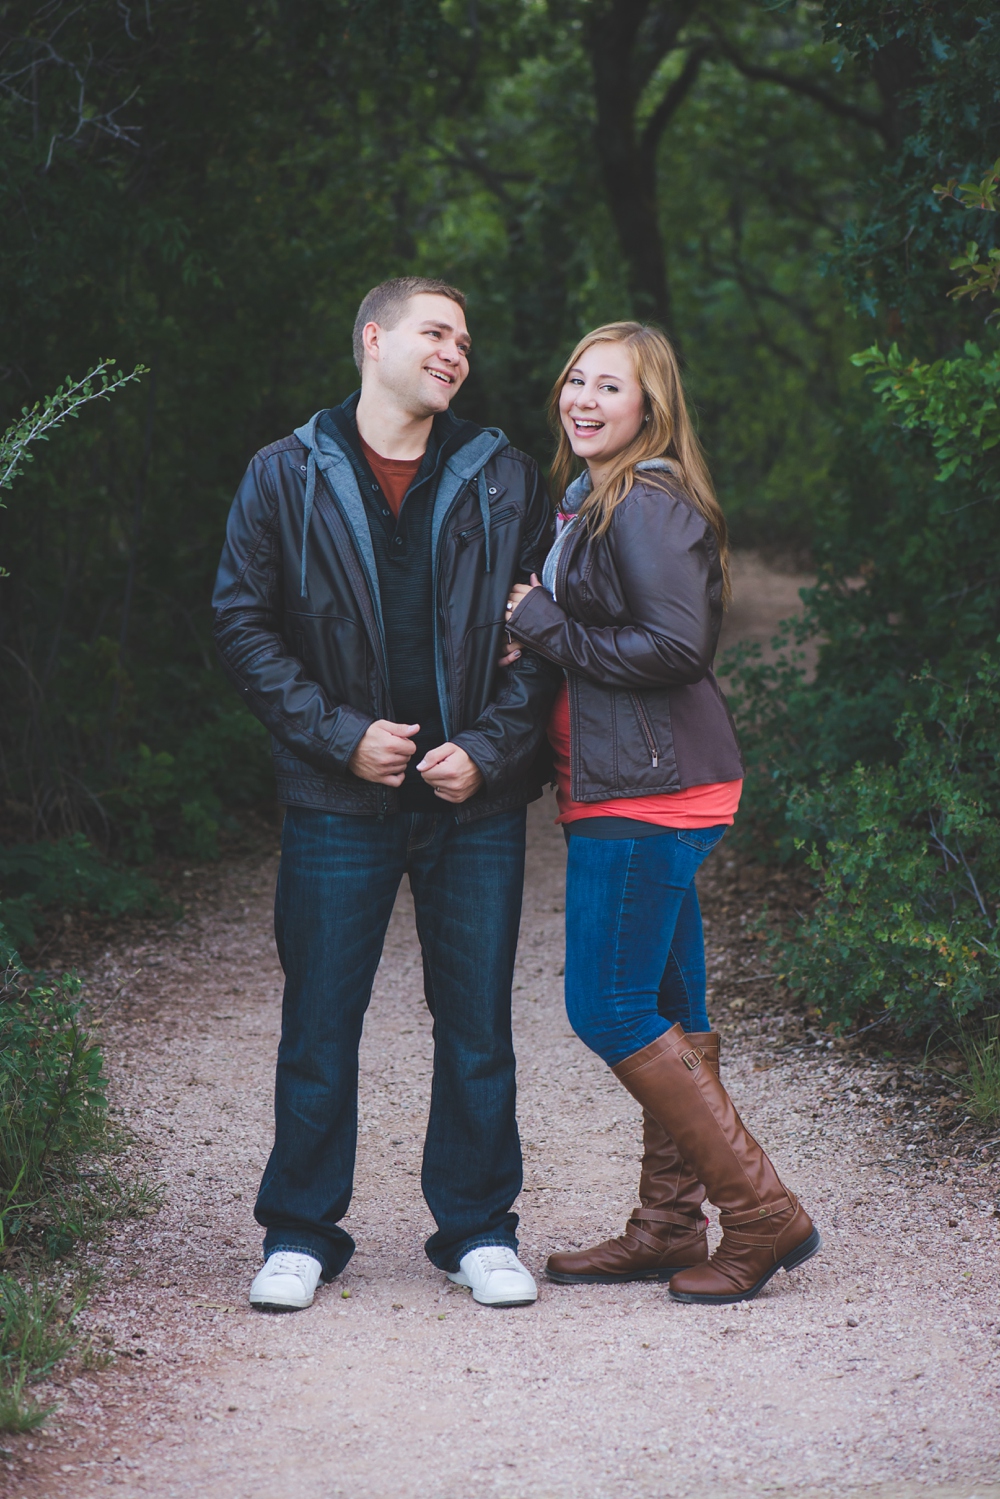 Palm Springs engagement photographer, Cathedral City photographer, La Quinta Wedding Photographer